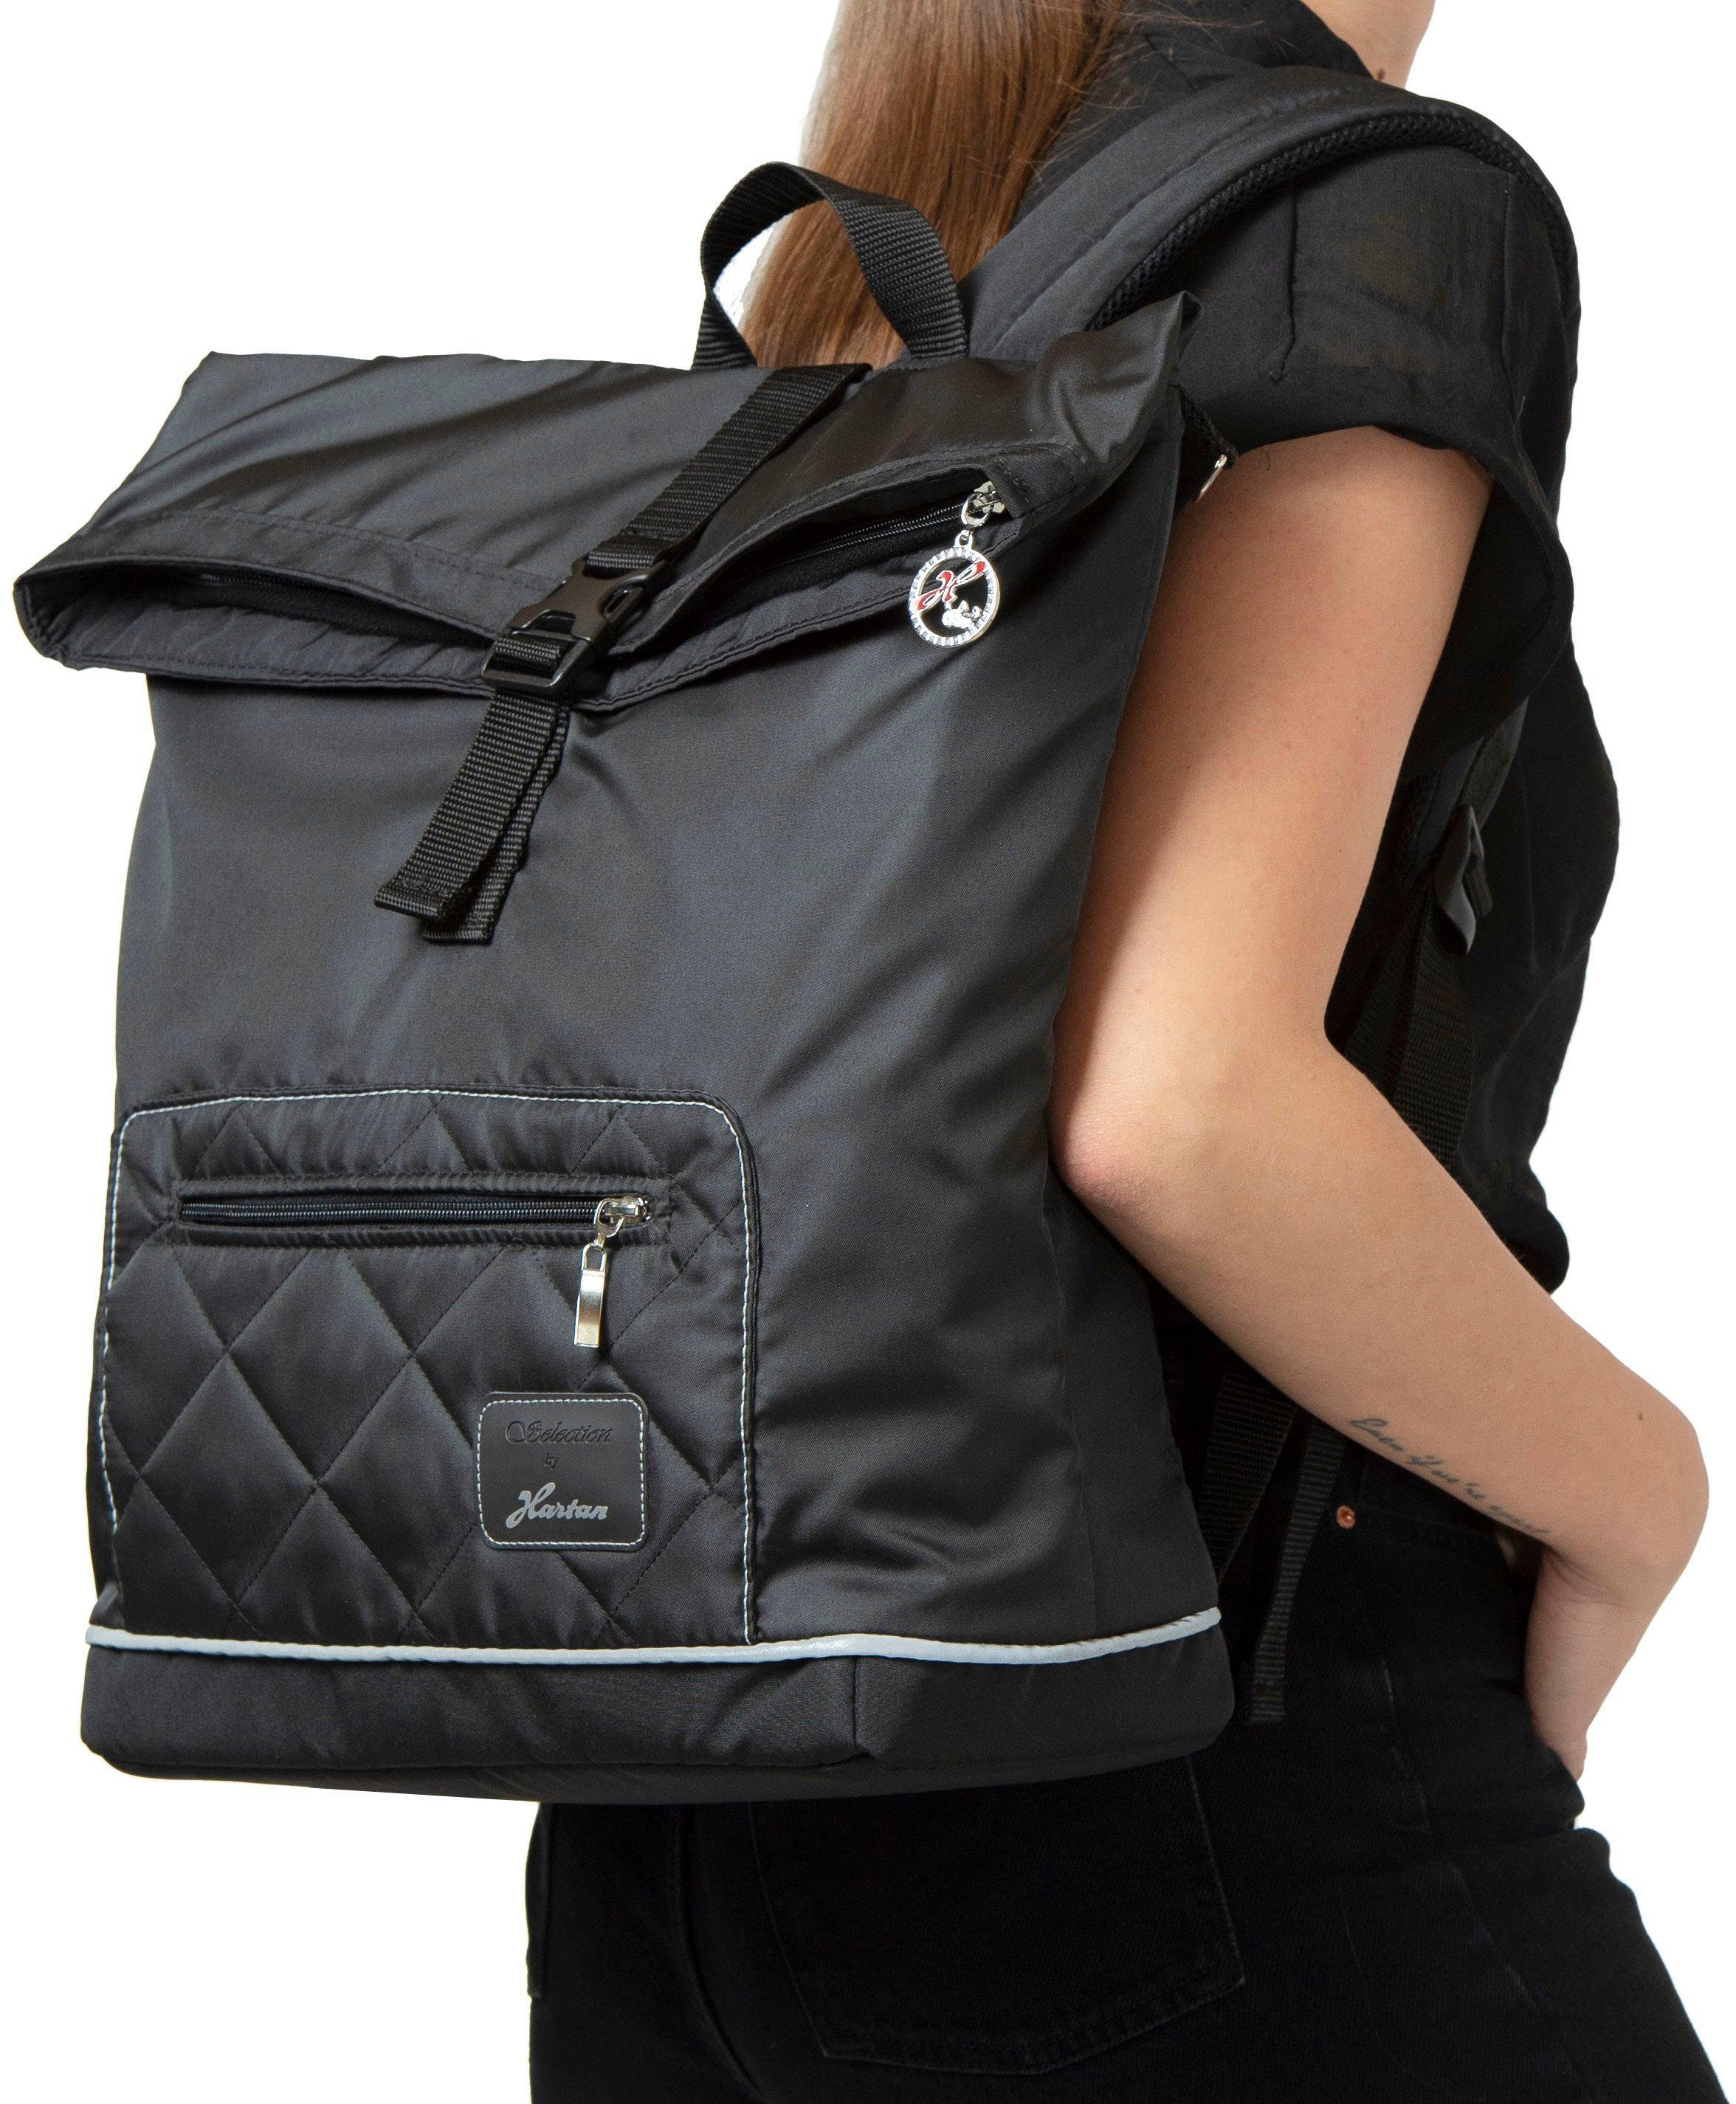 Hartan Wickelrucksack Space Casual Made - Thermofach; stars Collection, mit bag animal in Germany